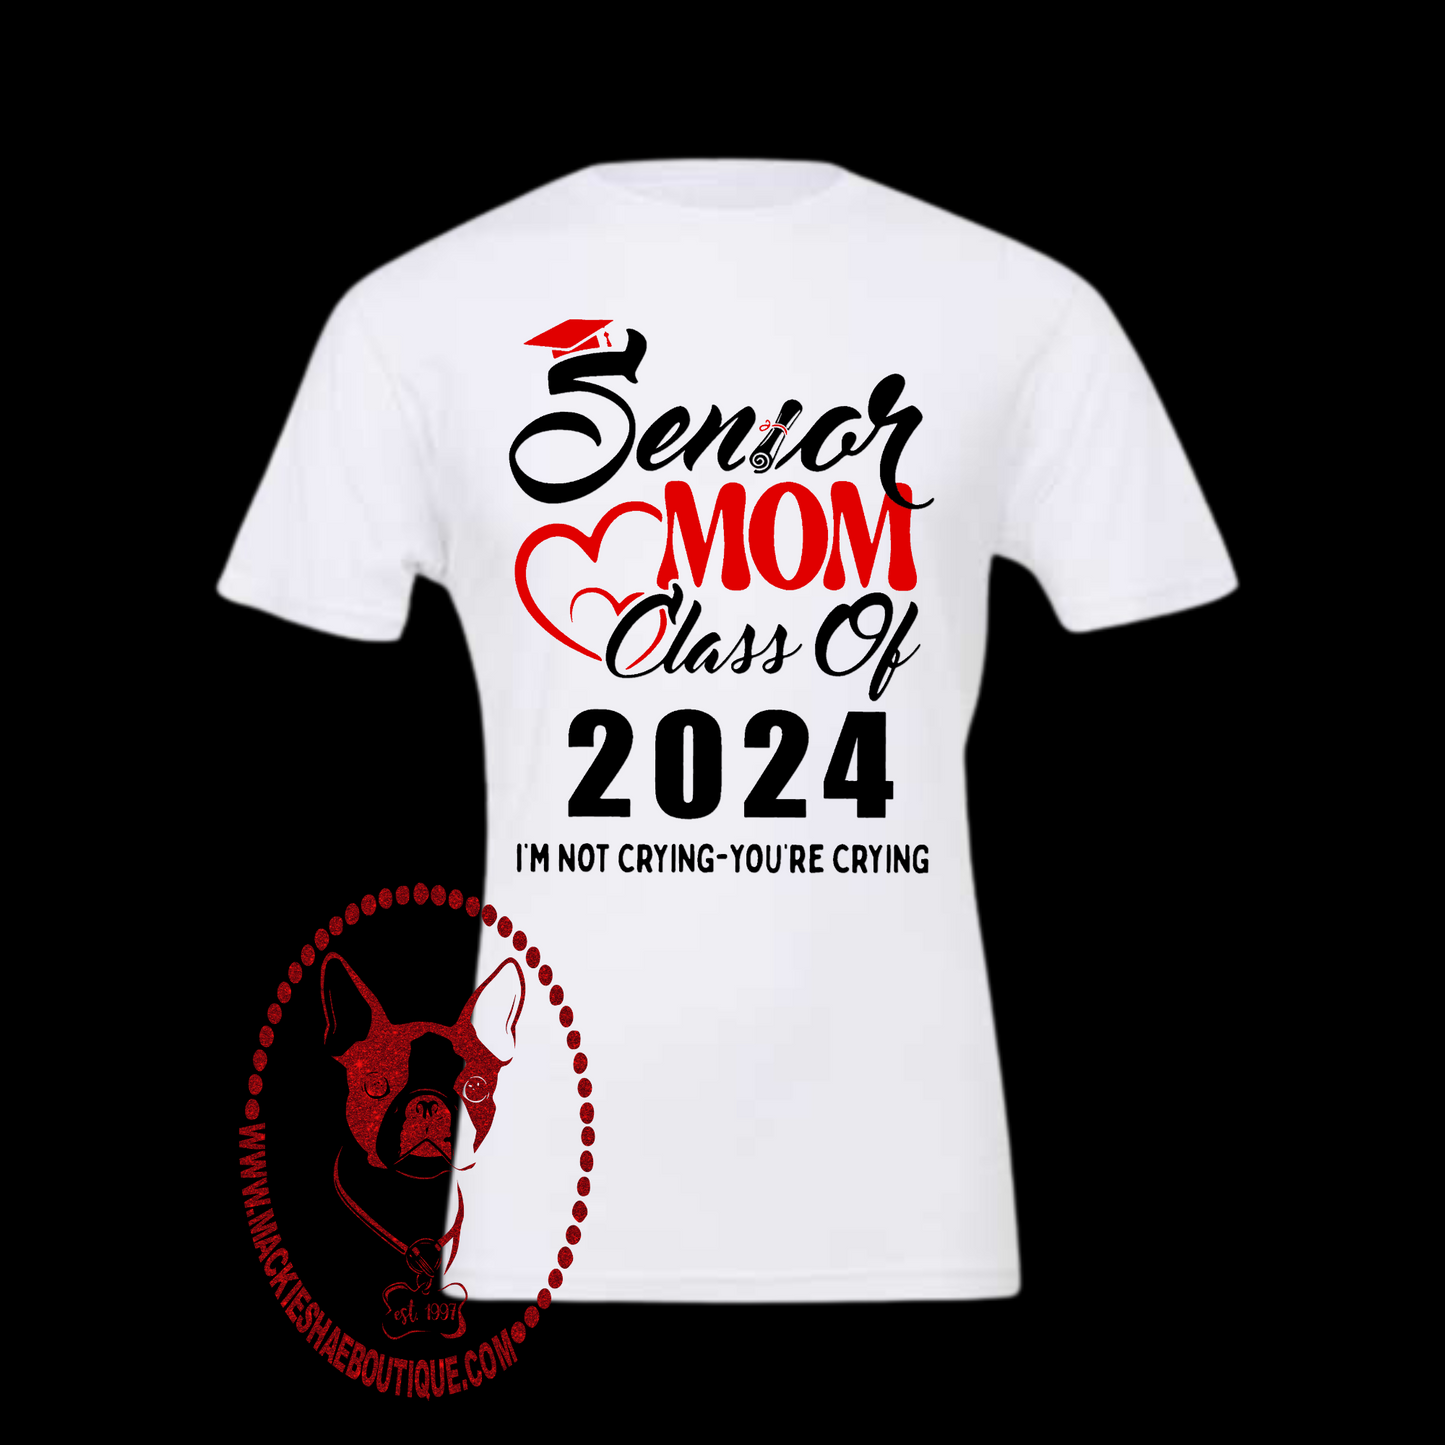 Senior Mom, Class of 2024 (Get any Year) Custom Shirt for Adults, Soft Short-Sleeve (Get any Colors)